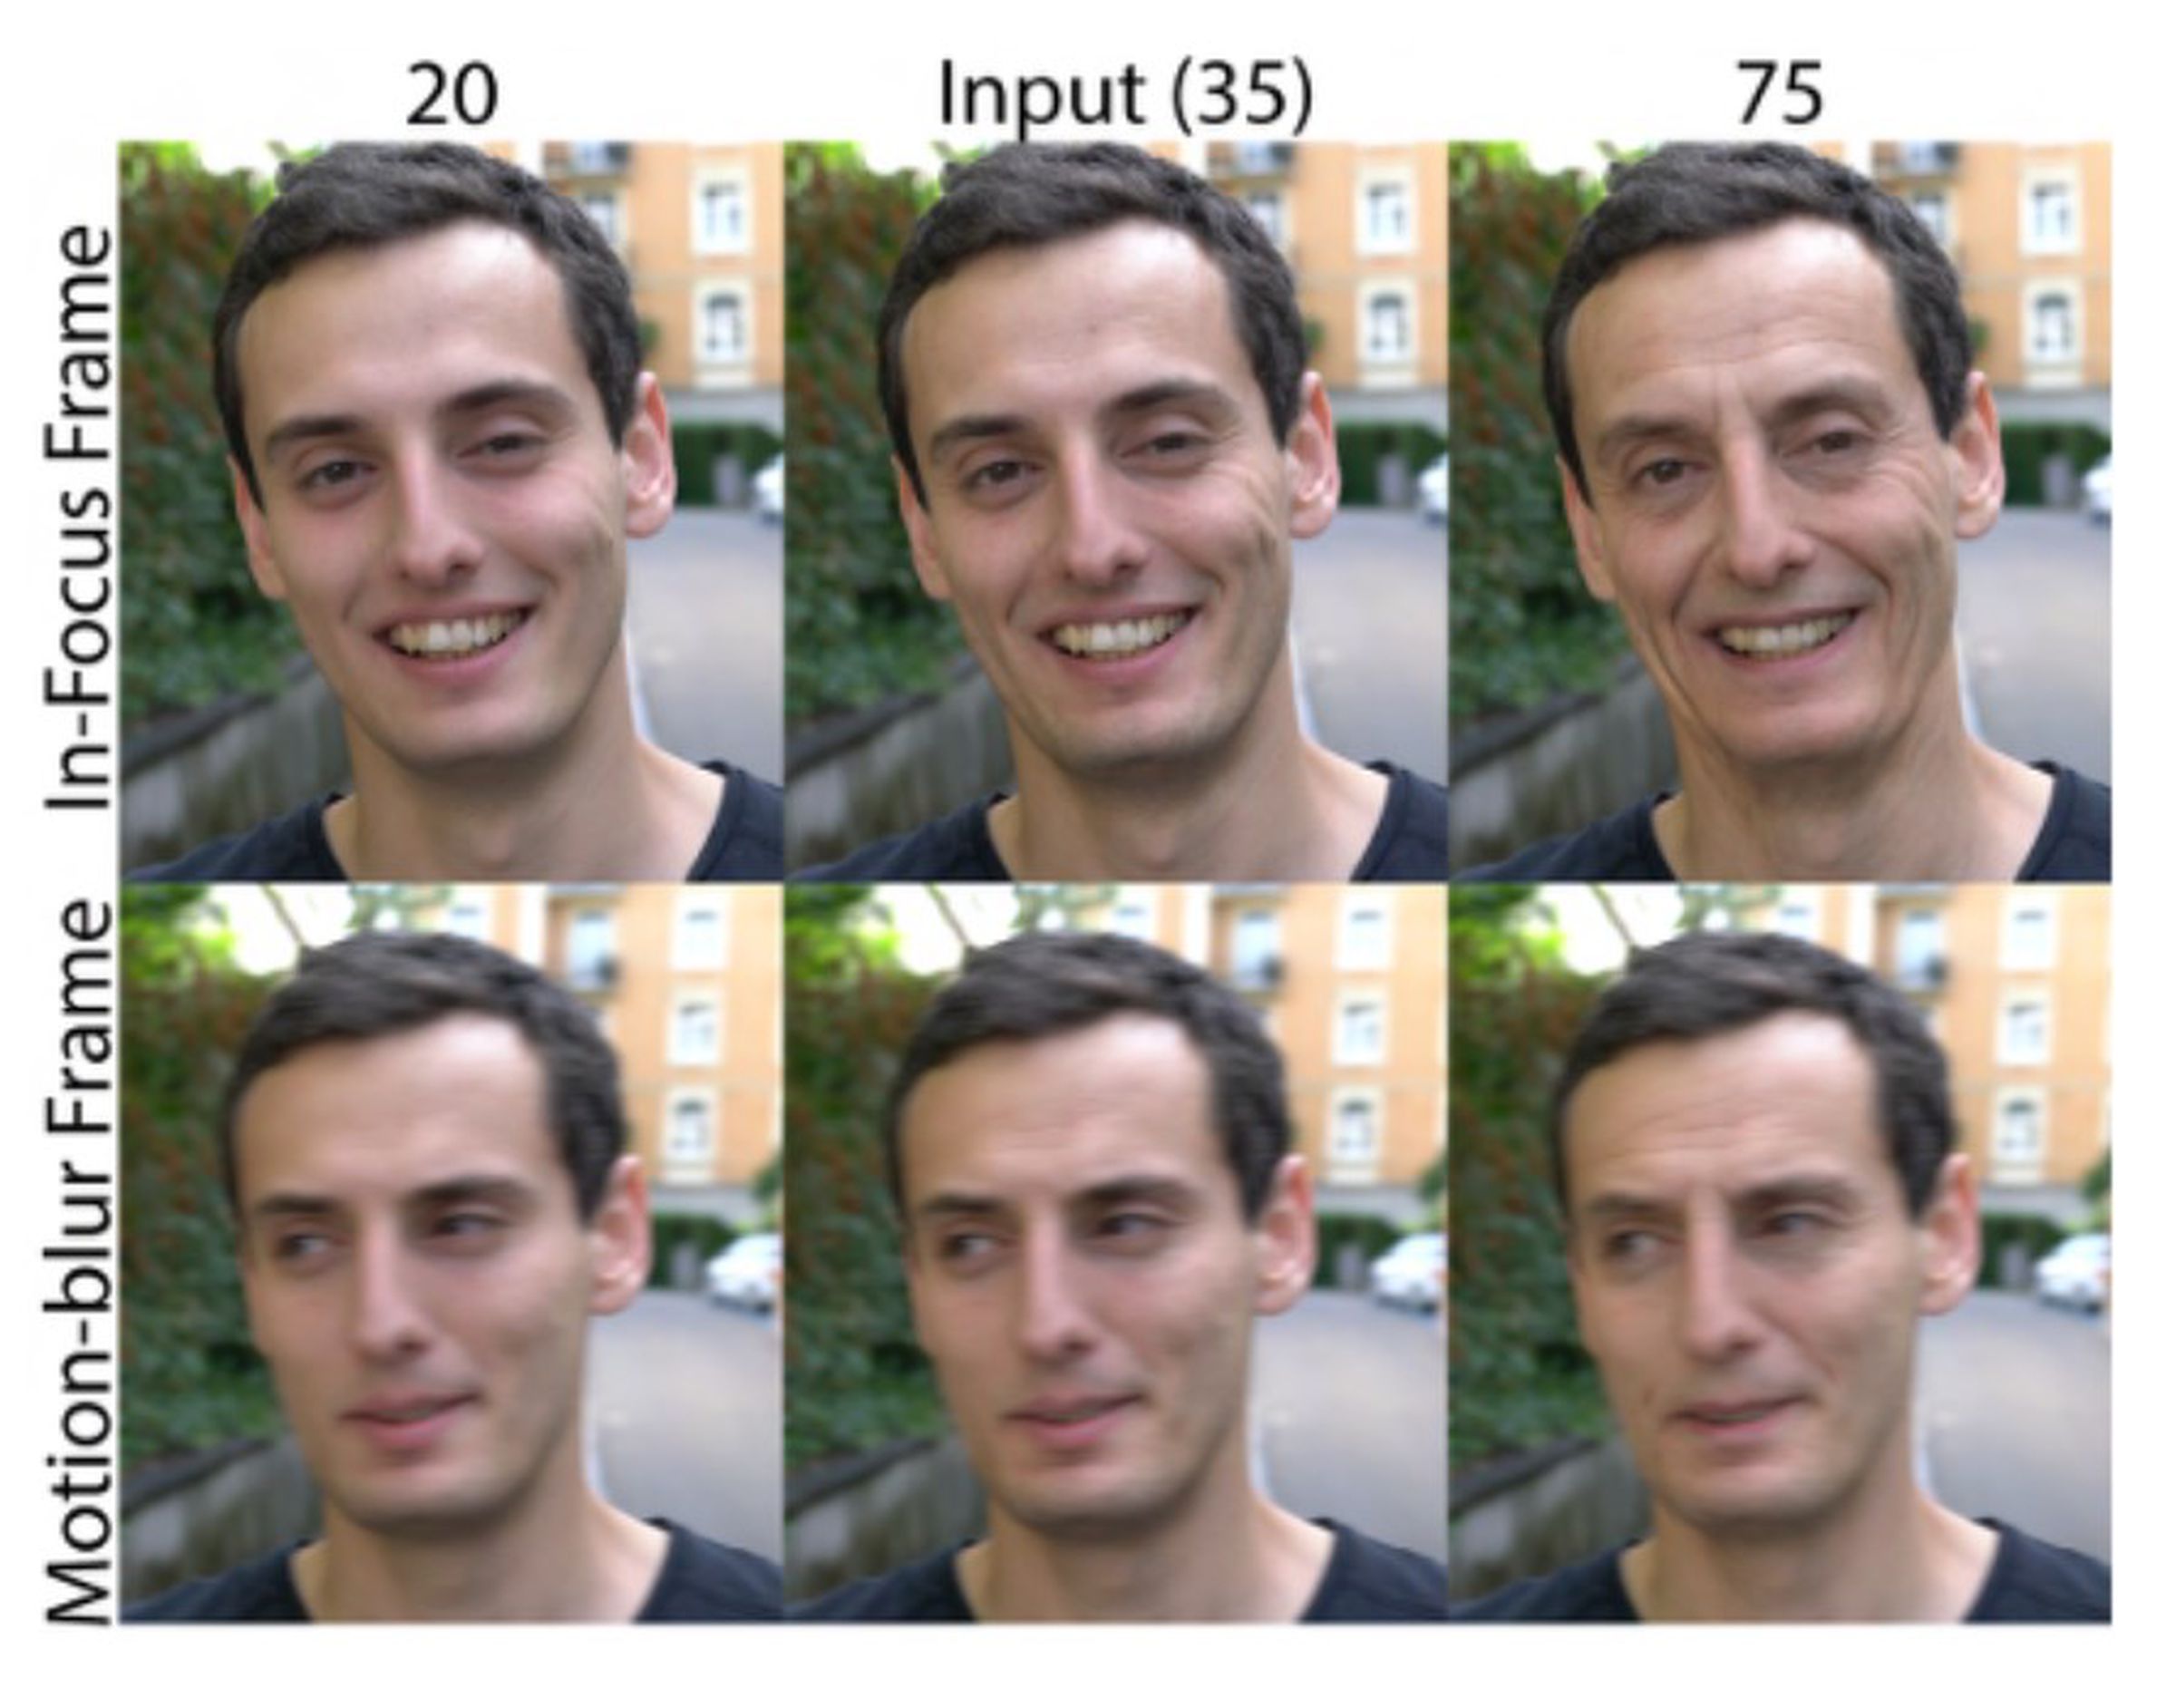 The face of a 20-75 year old man with motion blur still showing addition and subtraction of wrinkles.